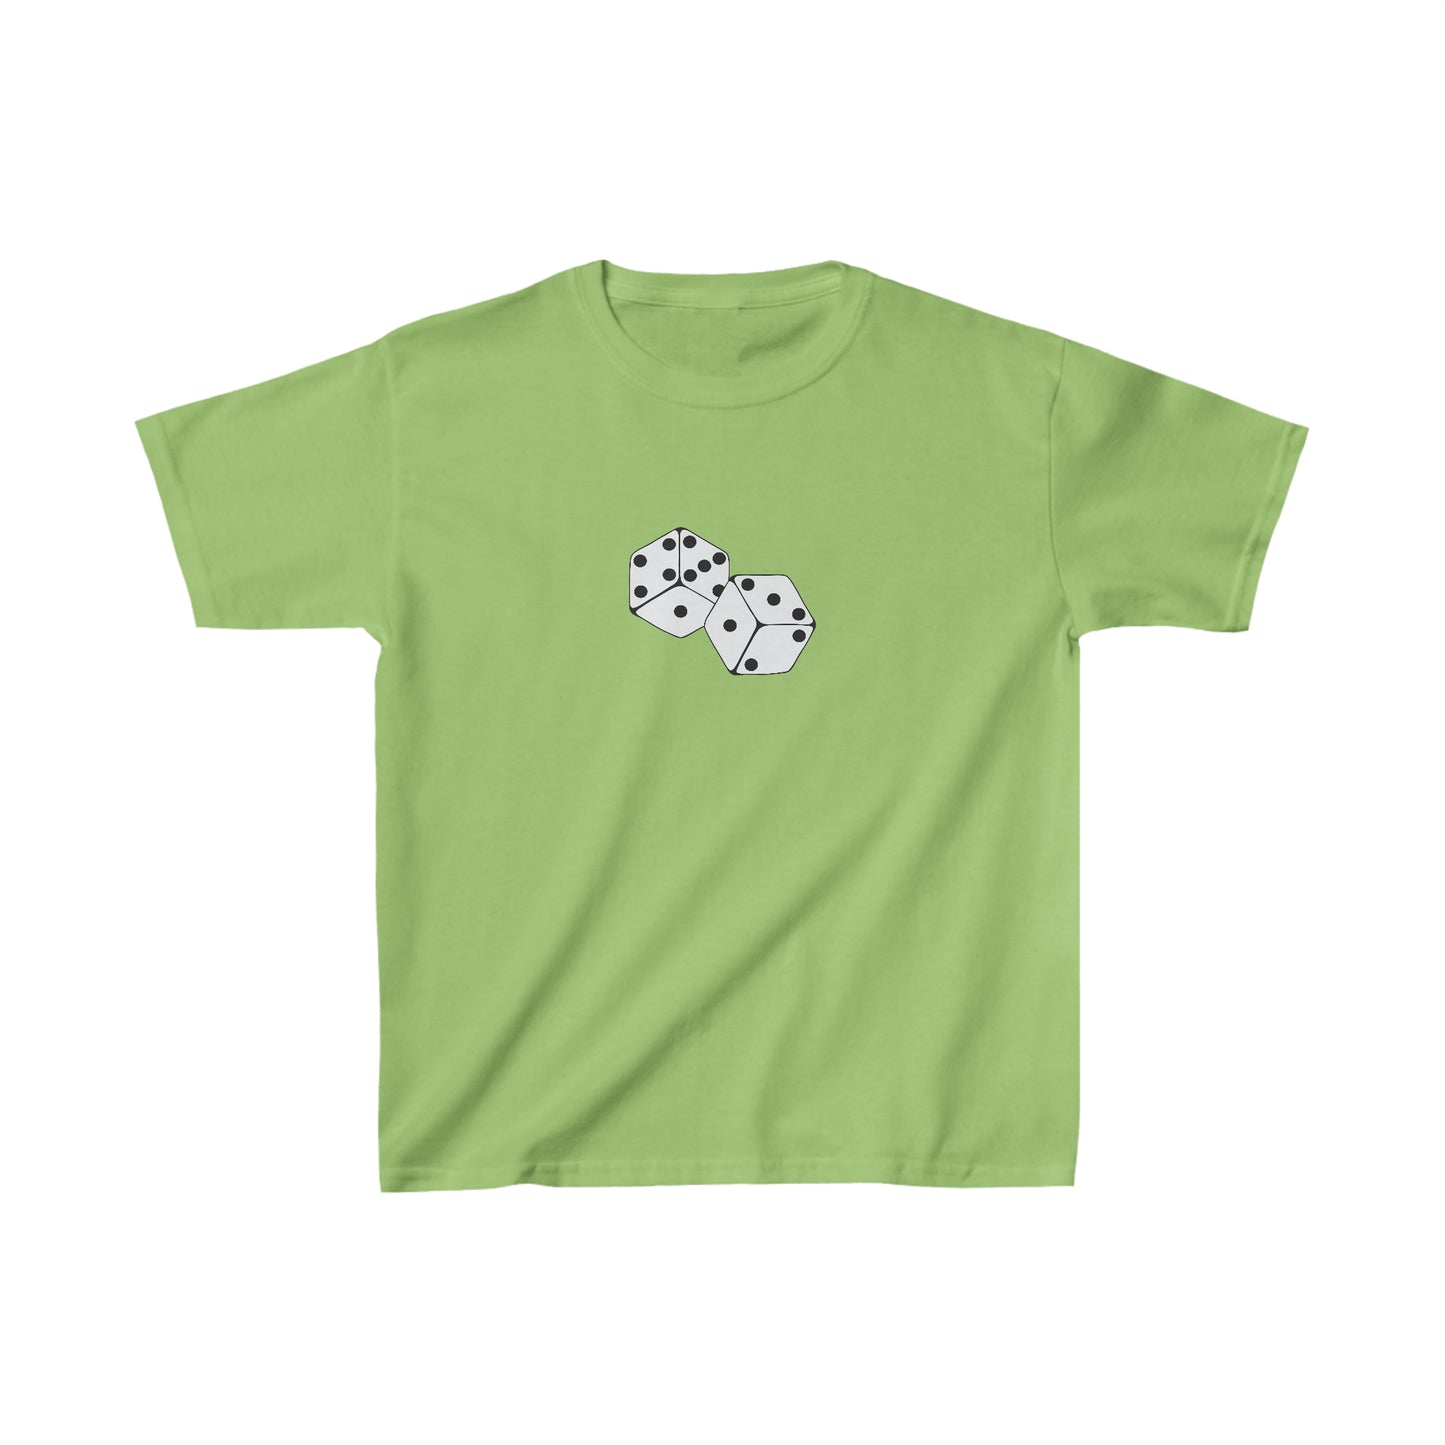 Dice Boxy Fit Baby Tee